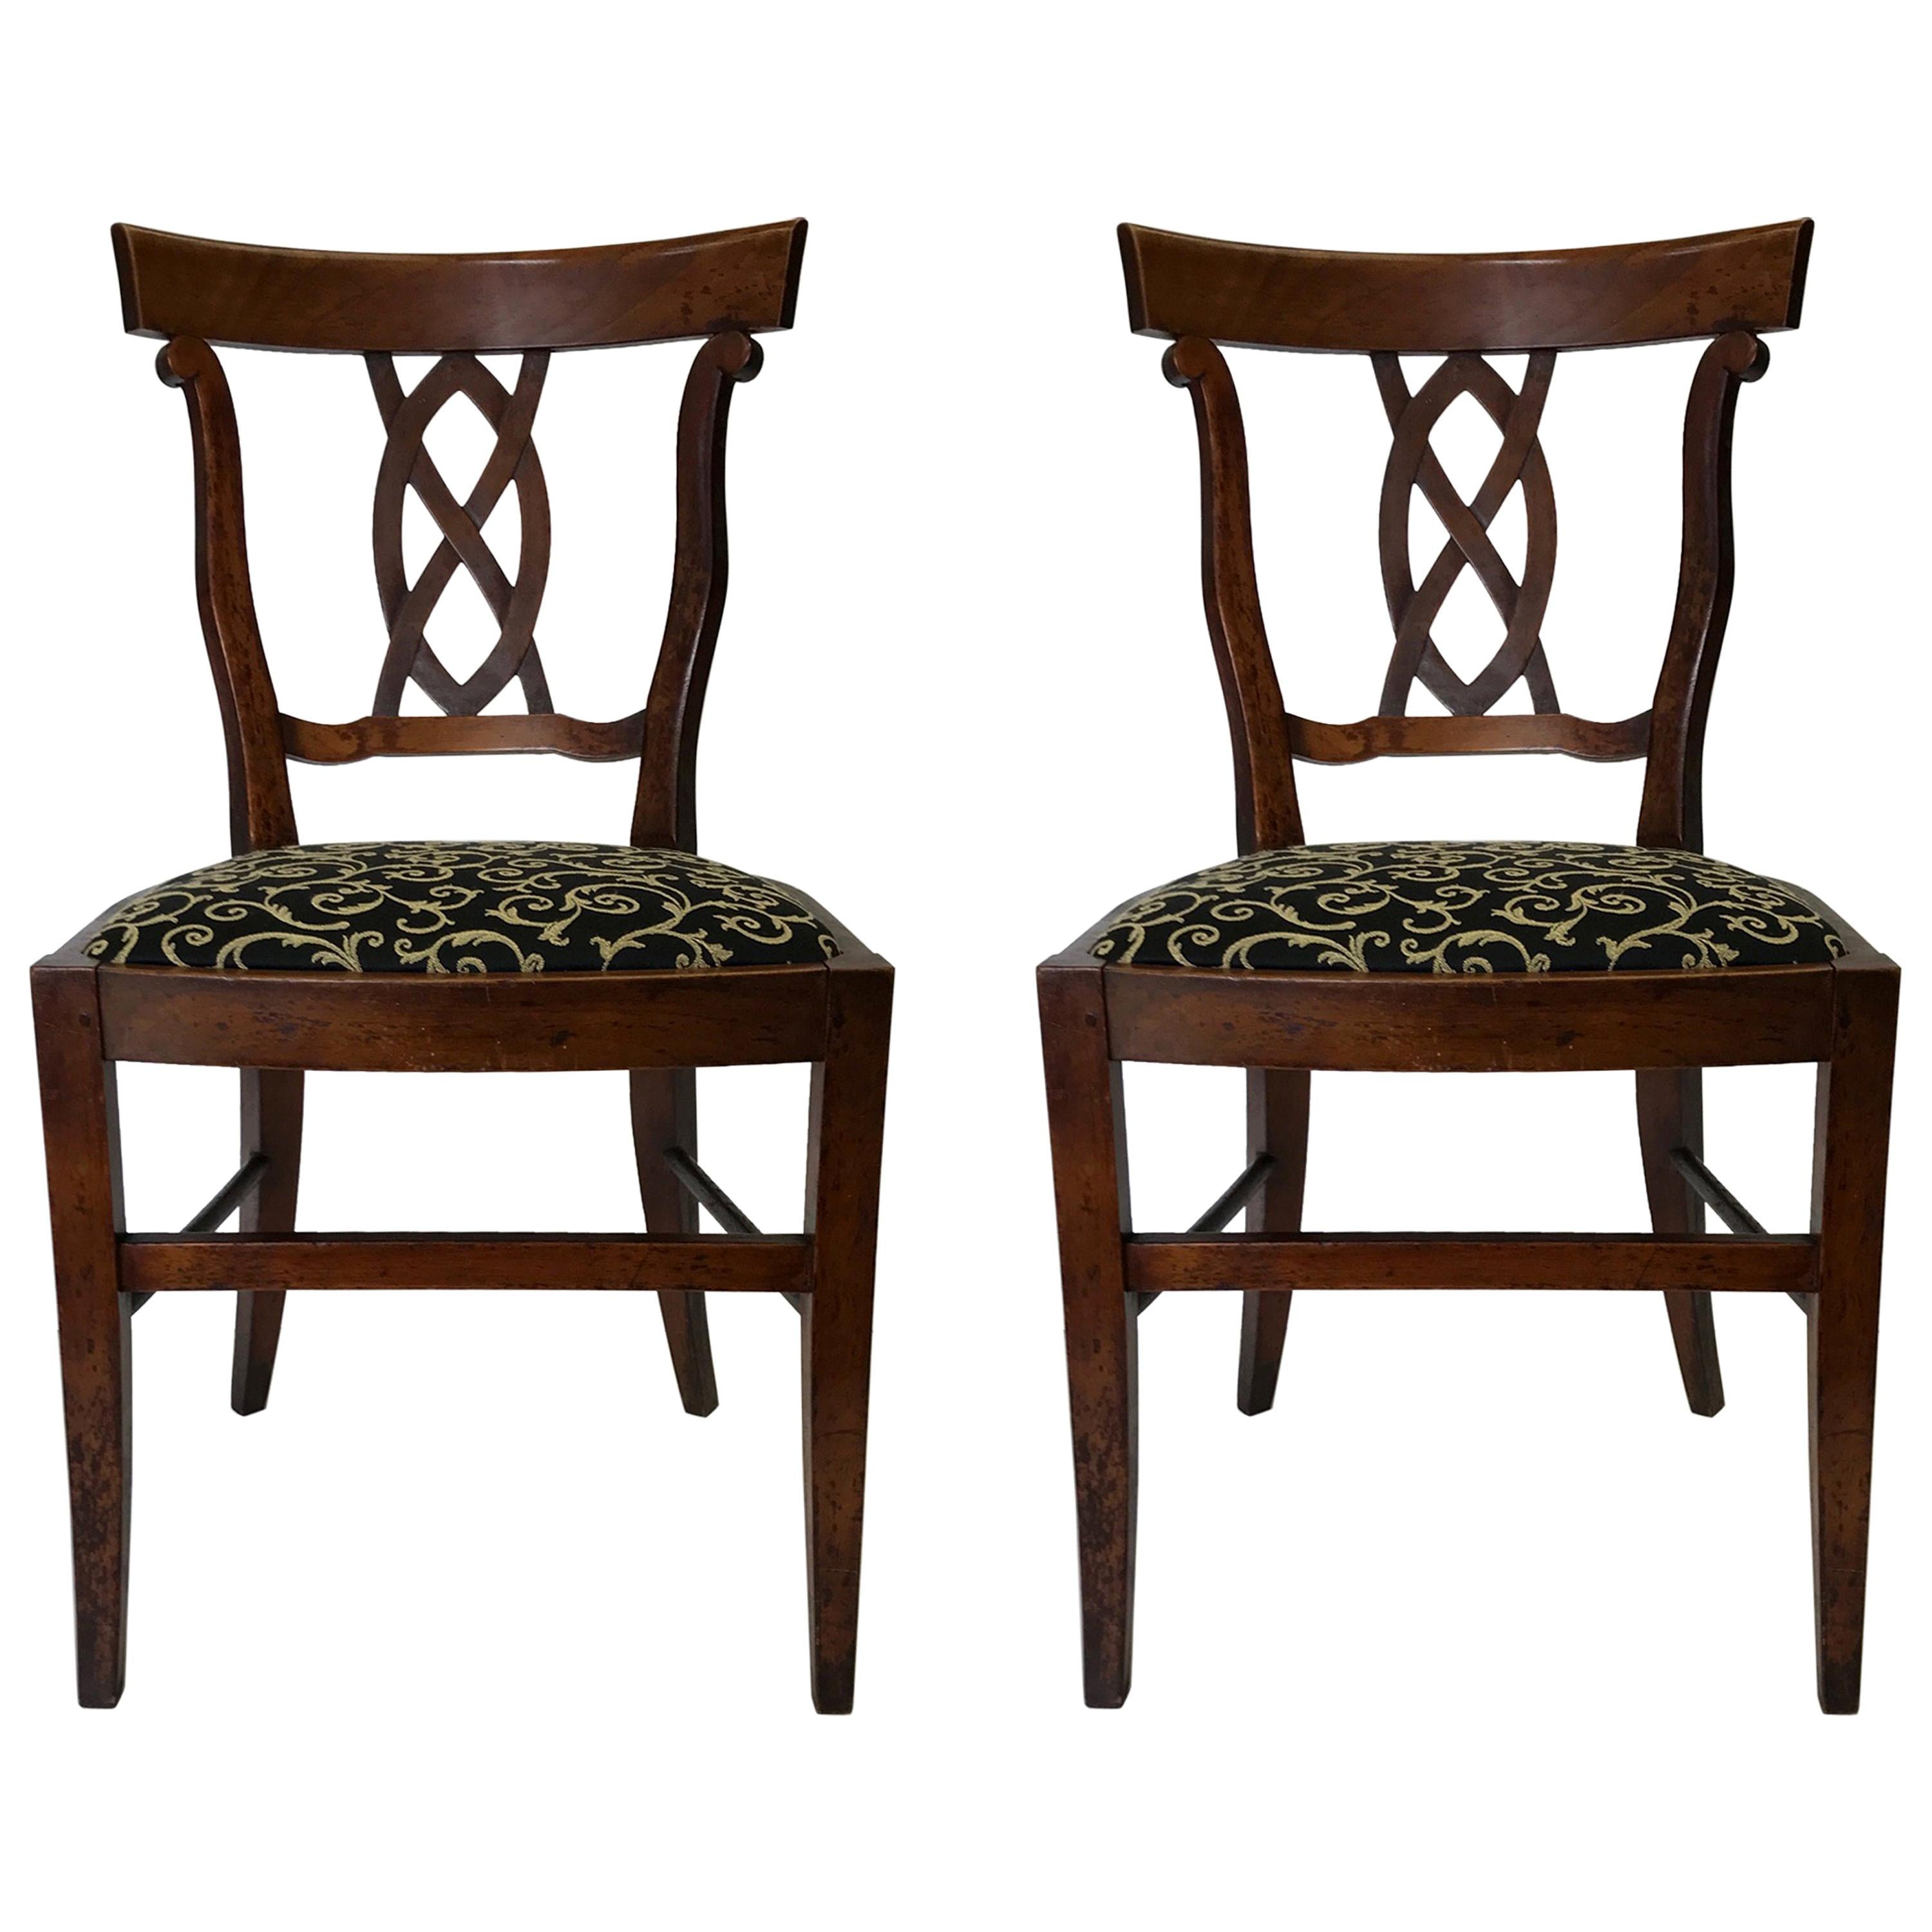 Pair of Antique Side Accent Chairs, 19th Century